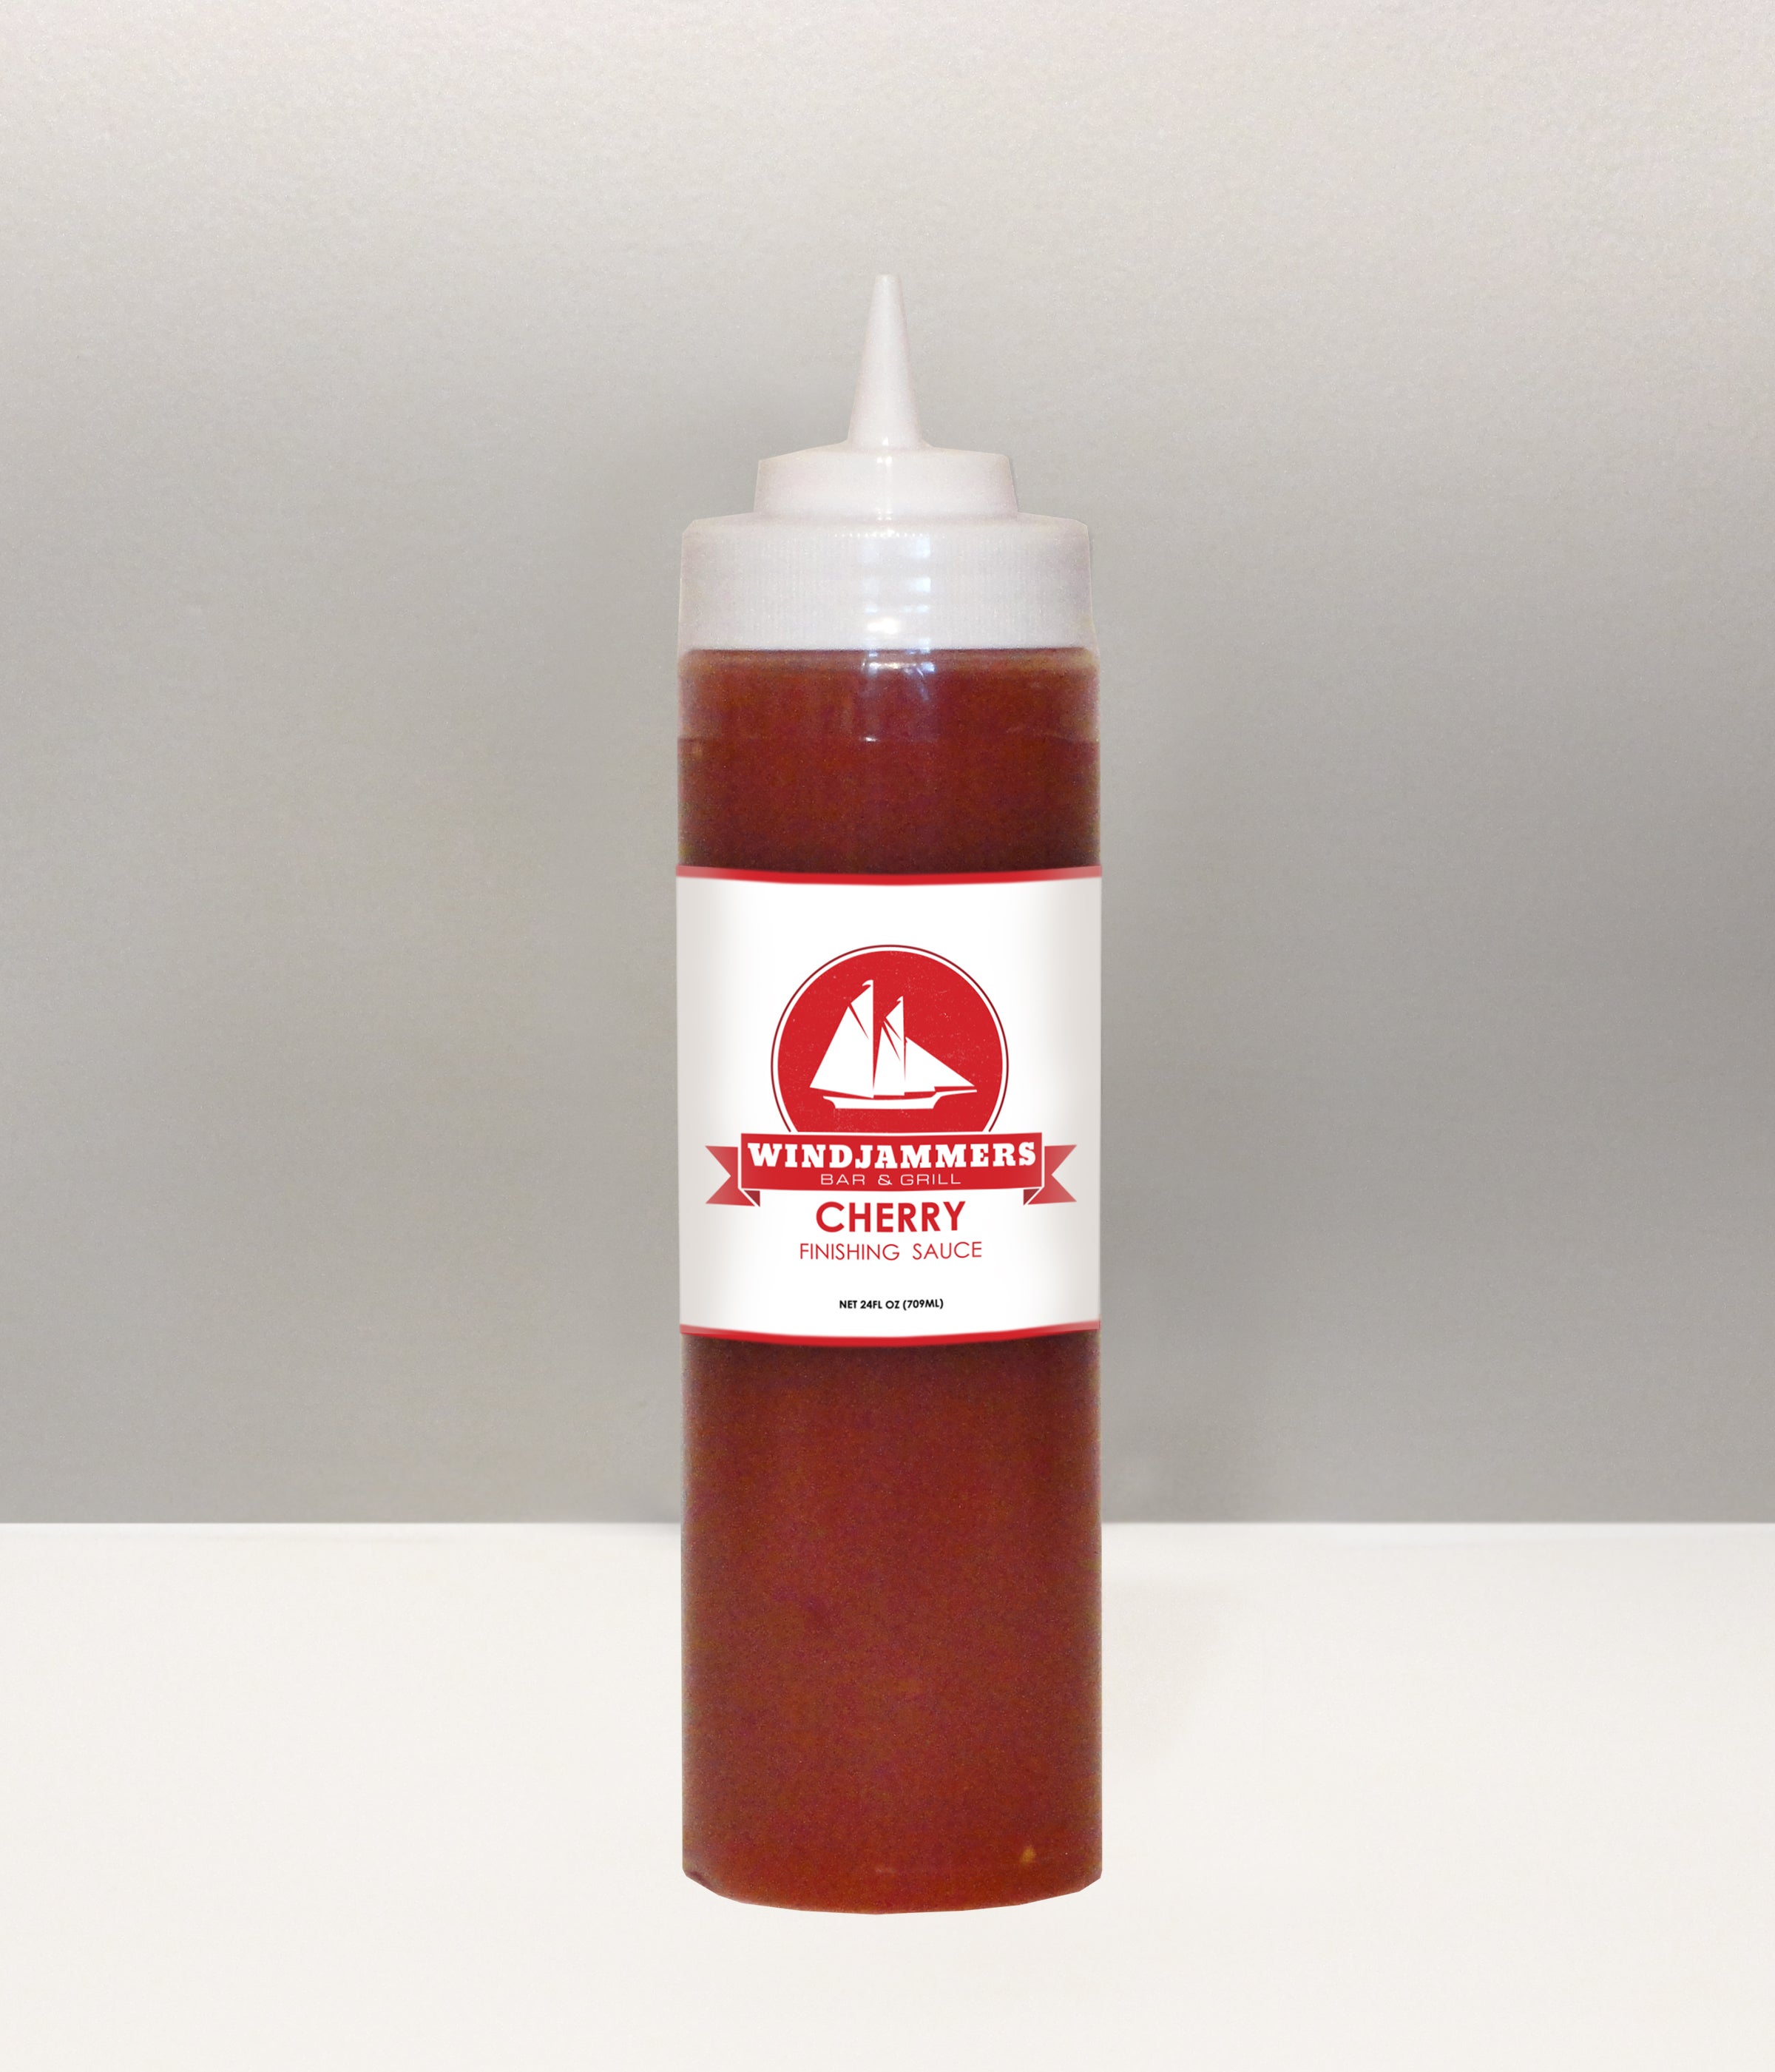 Windjammers Cherry Finishing Sauce  Free shipping on orders $75 or more!